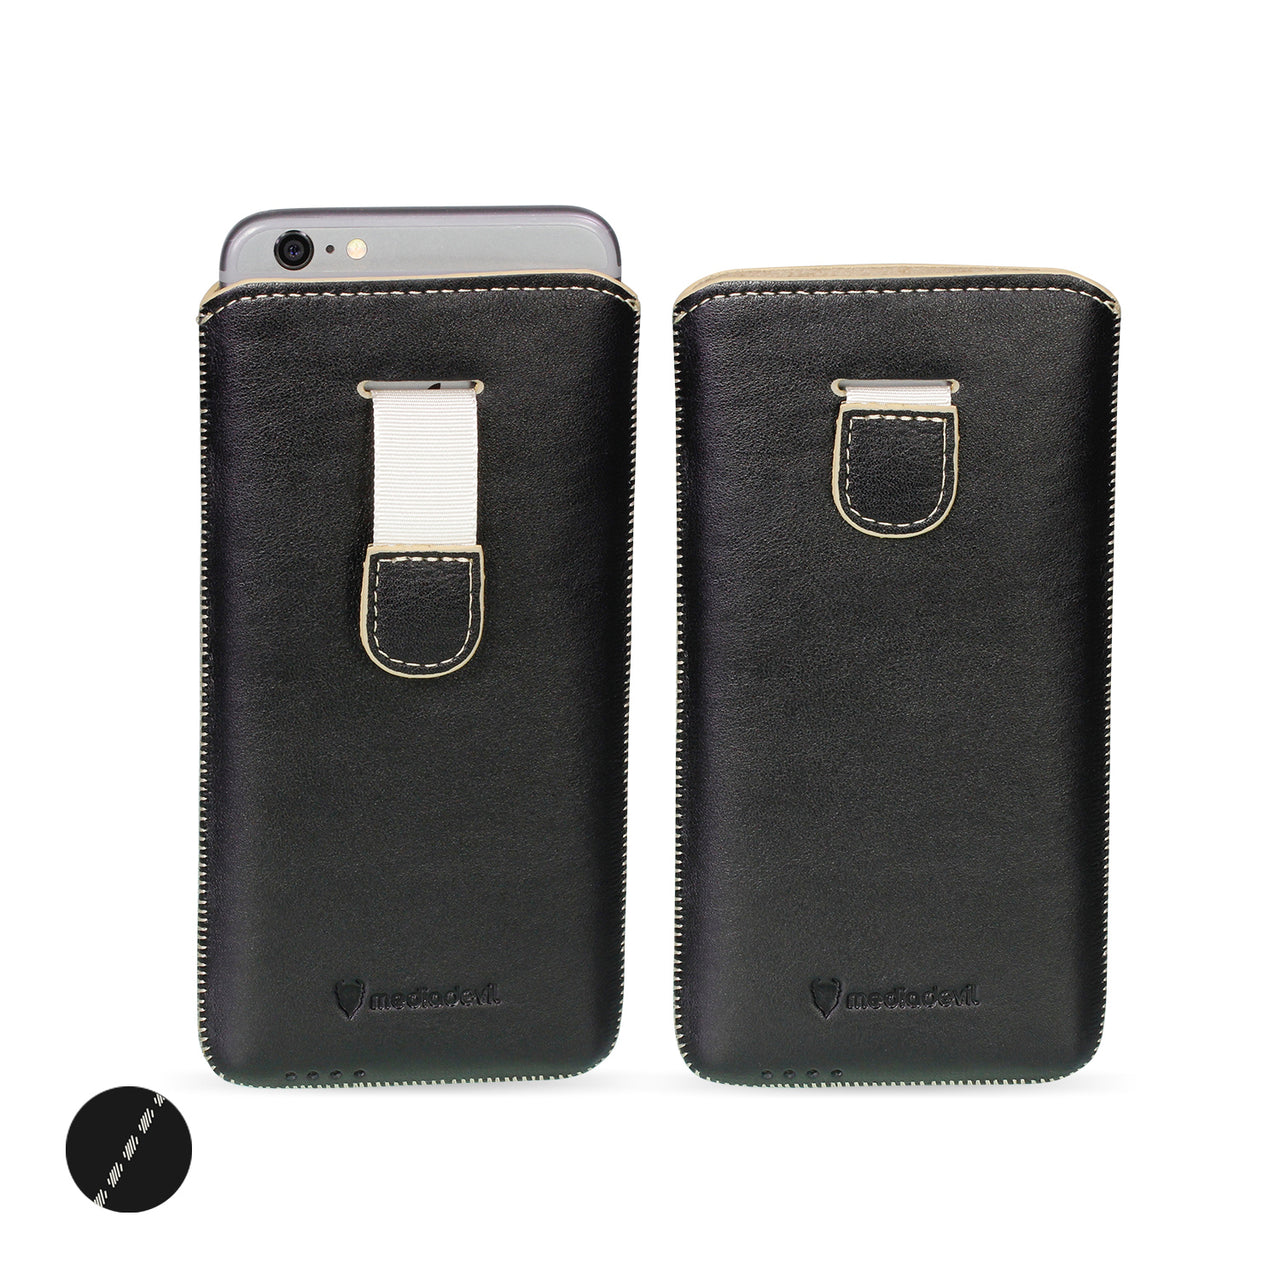 Huawei Mate 20 Genuine Leather Pouch Sleeve Case | Artisanpouch